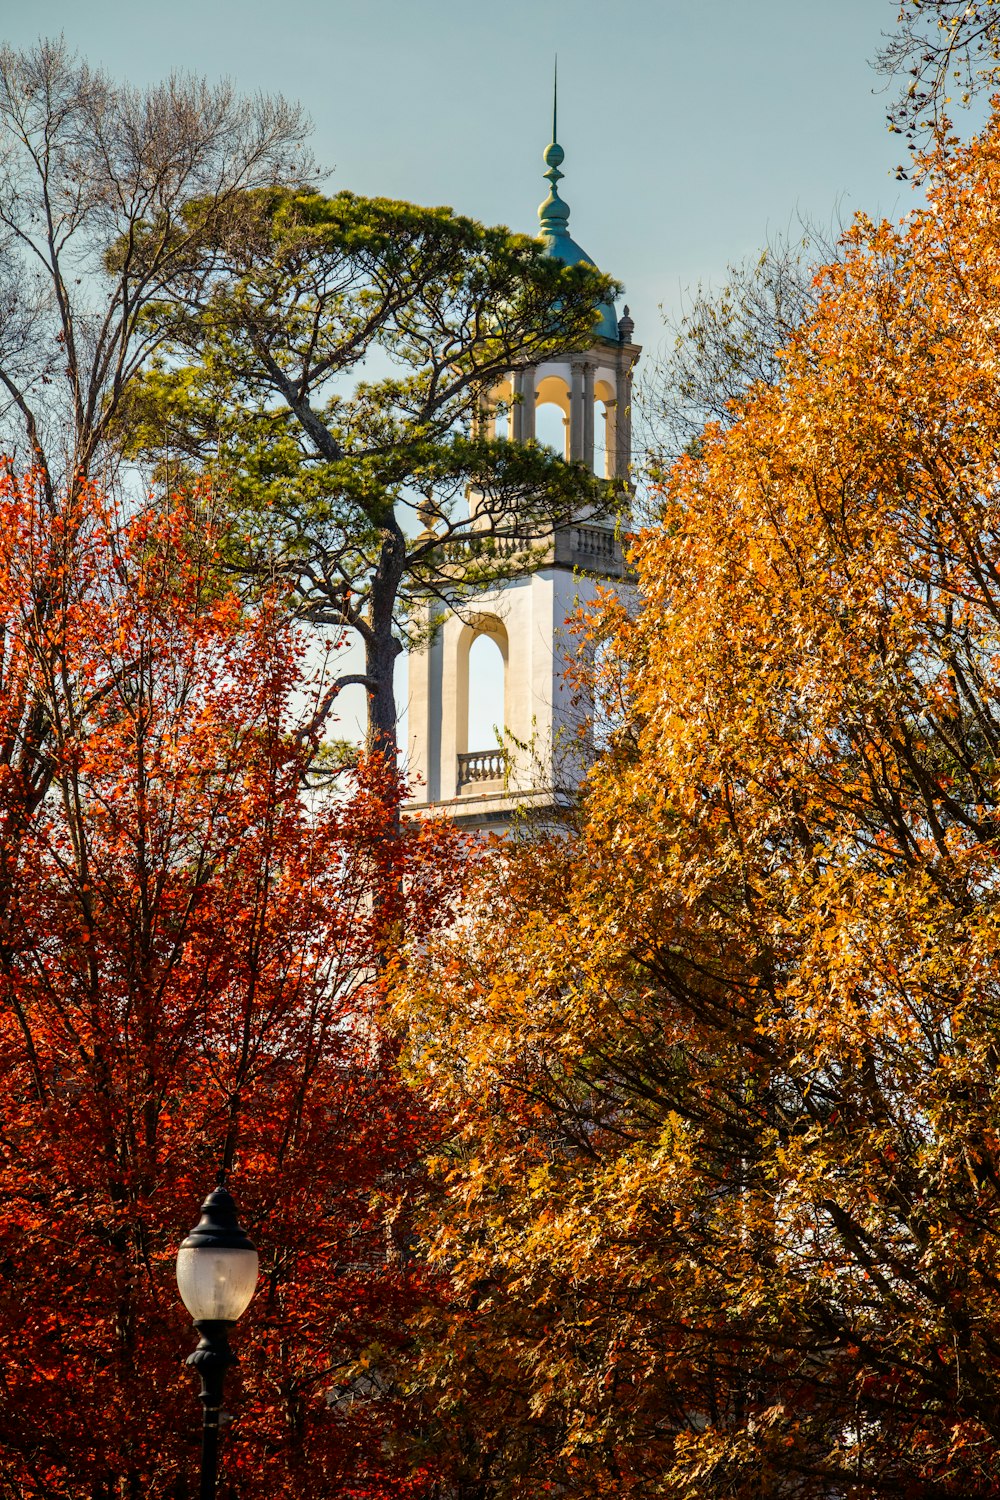 a clock tower surrounded by trees in the fall